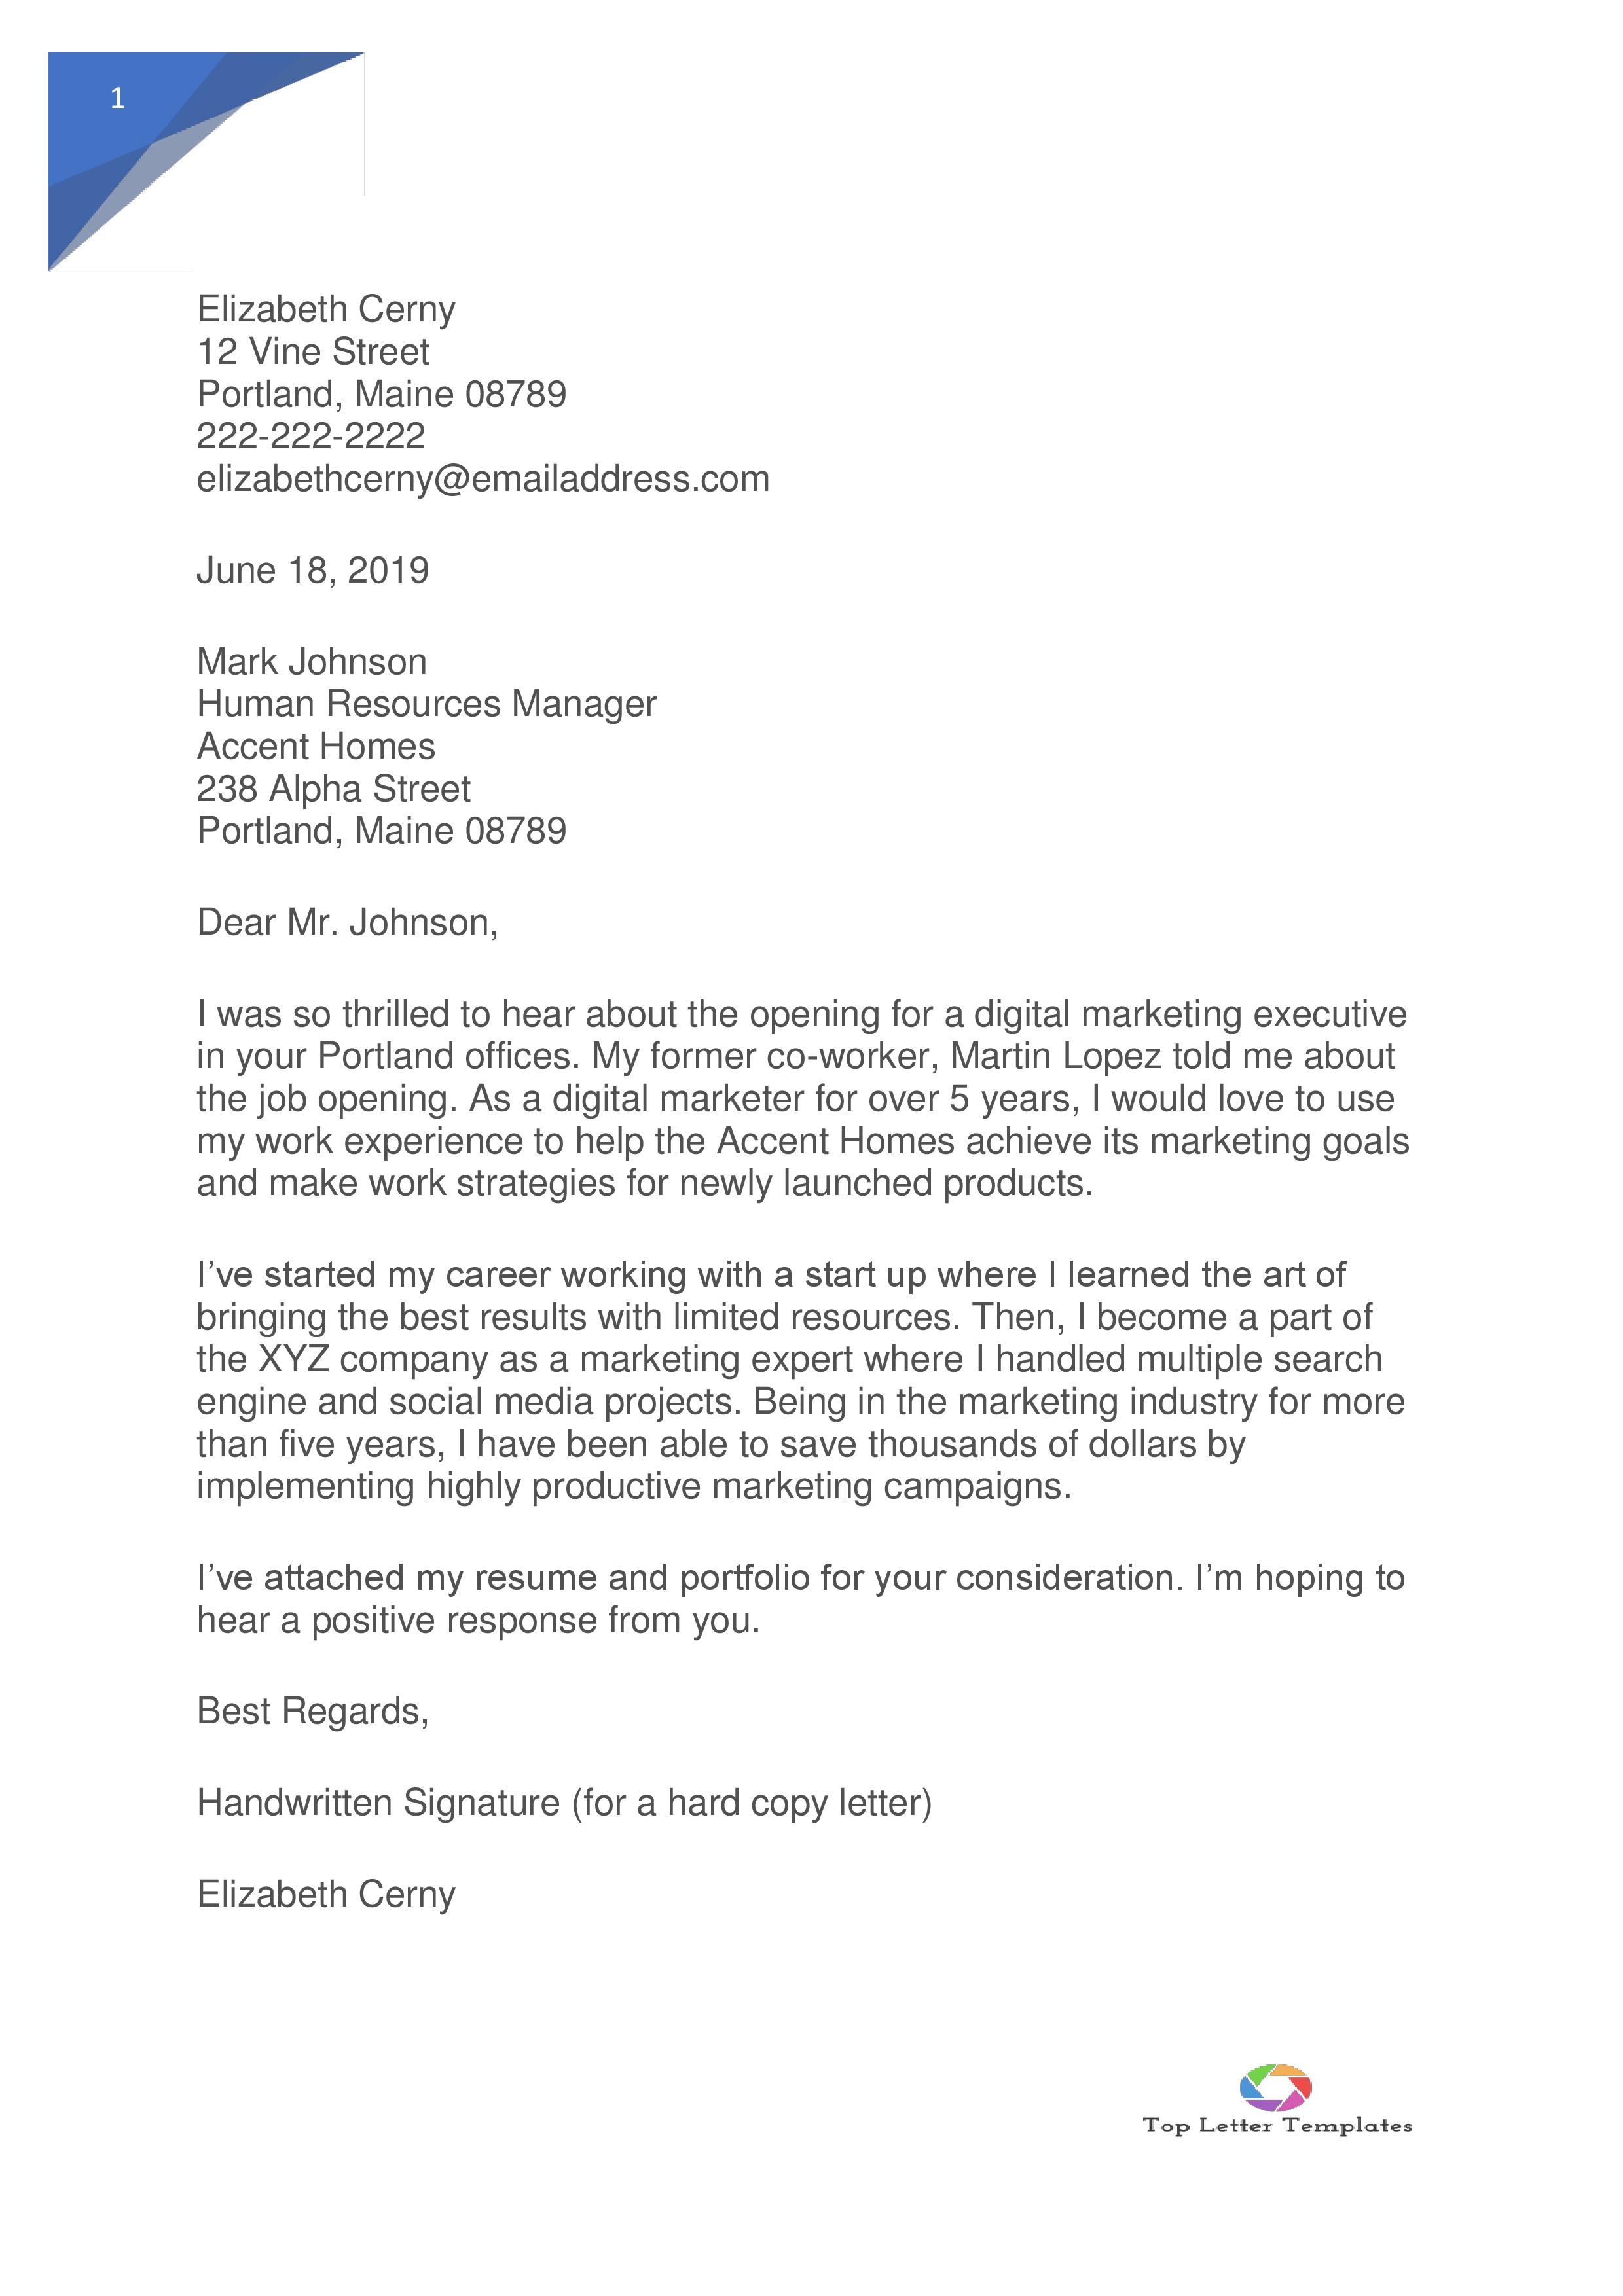 Examples of Application Letters for Employment - Top Letter Templates